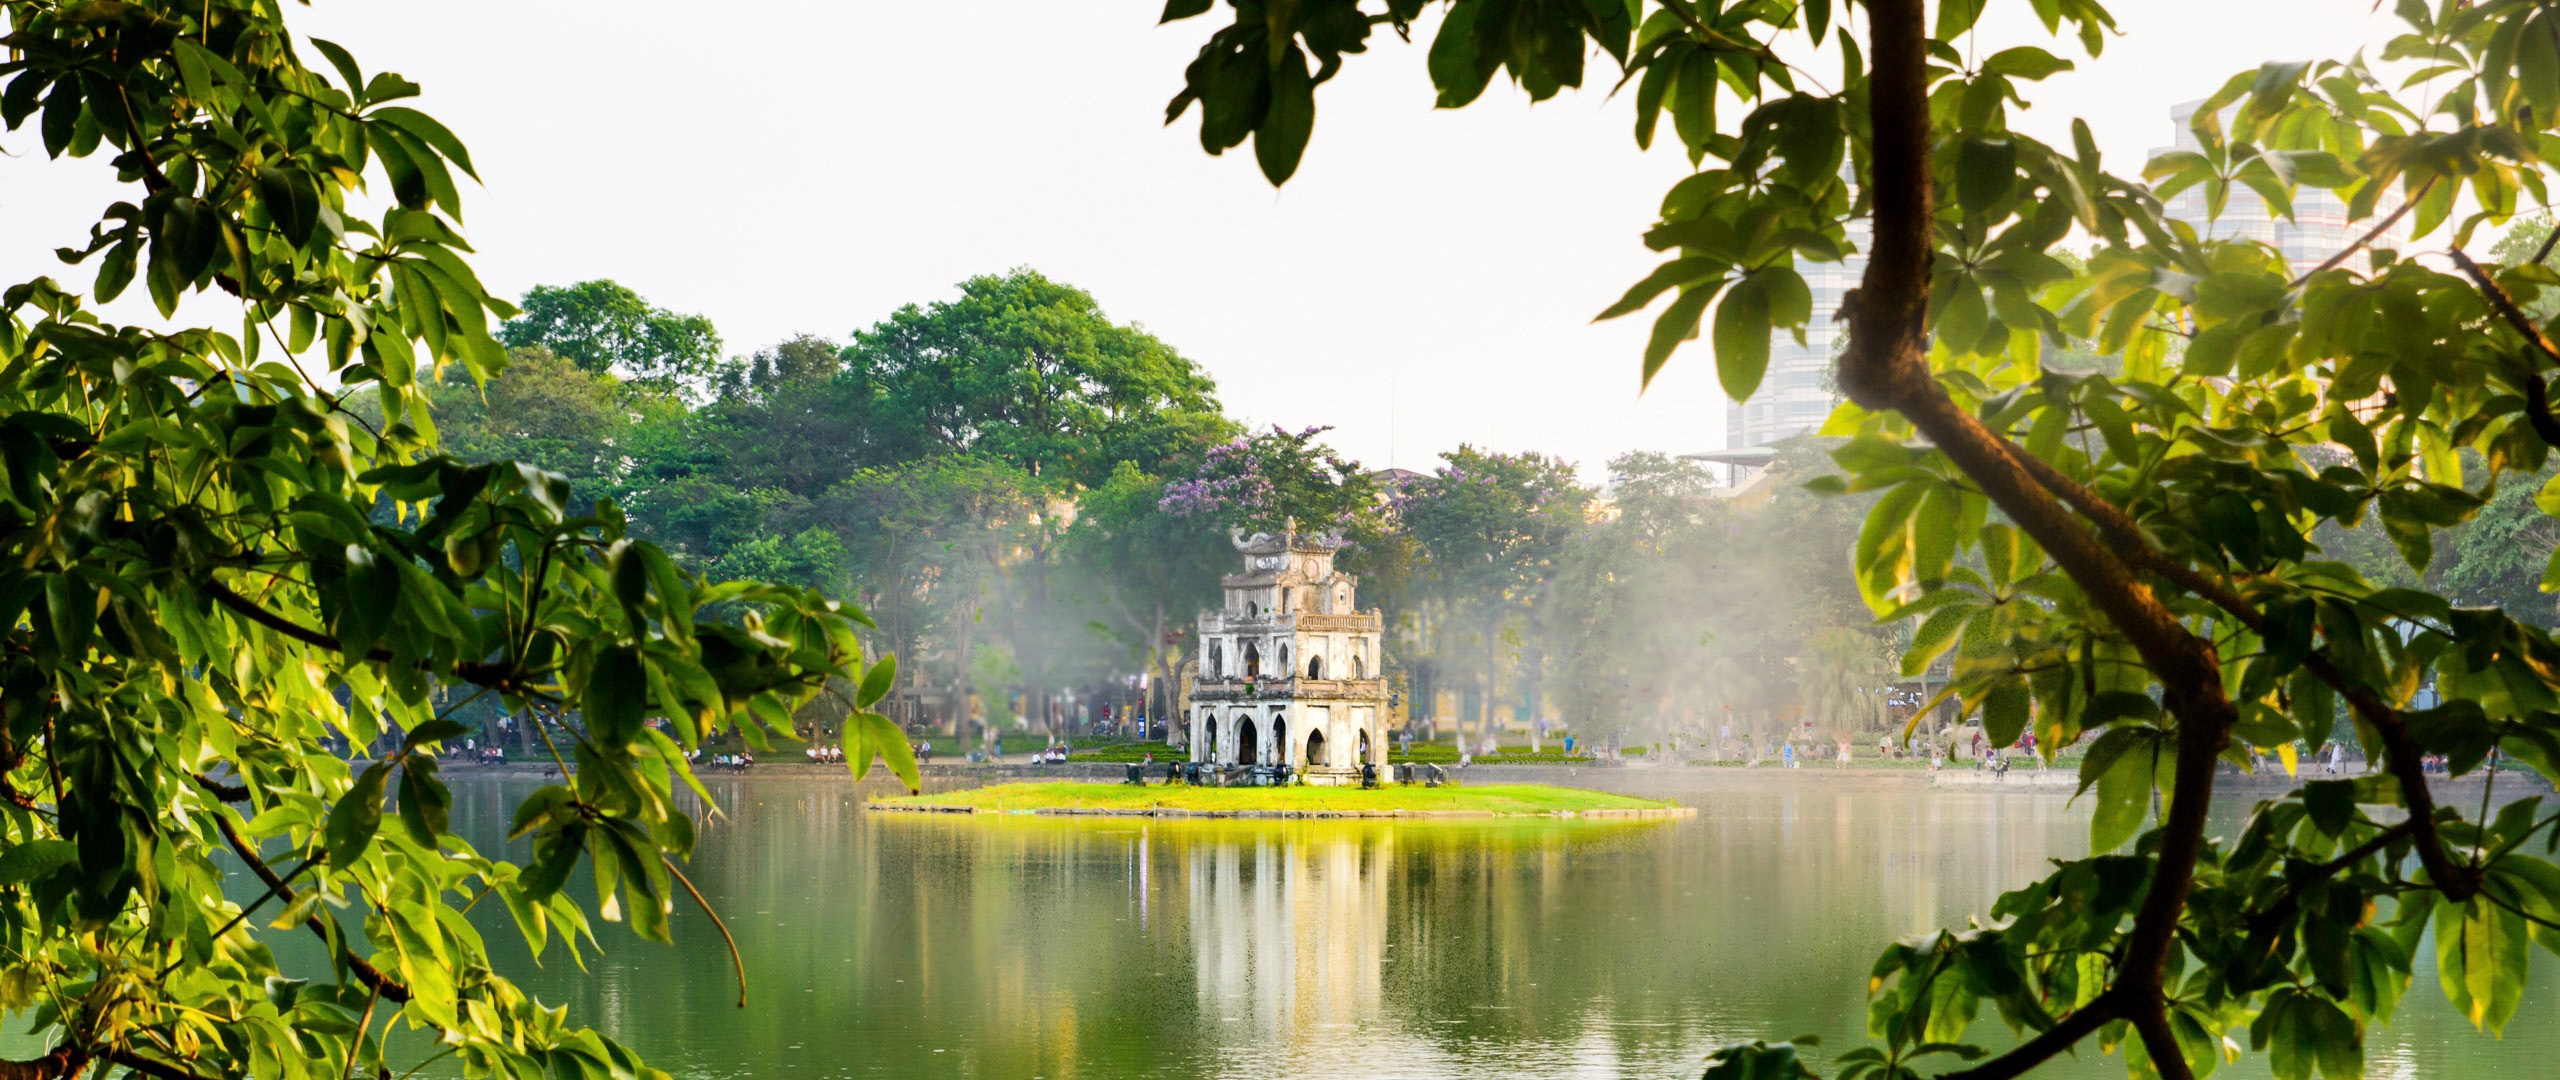 Travel to Hanoi: What to eat, where to stay, and how to get around?